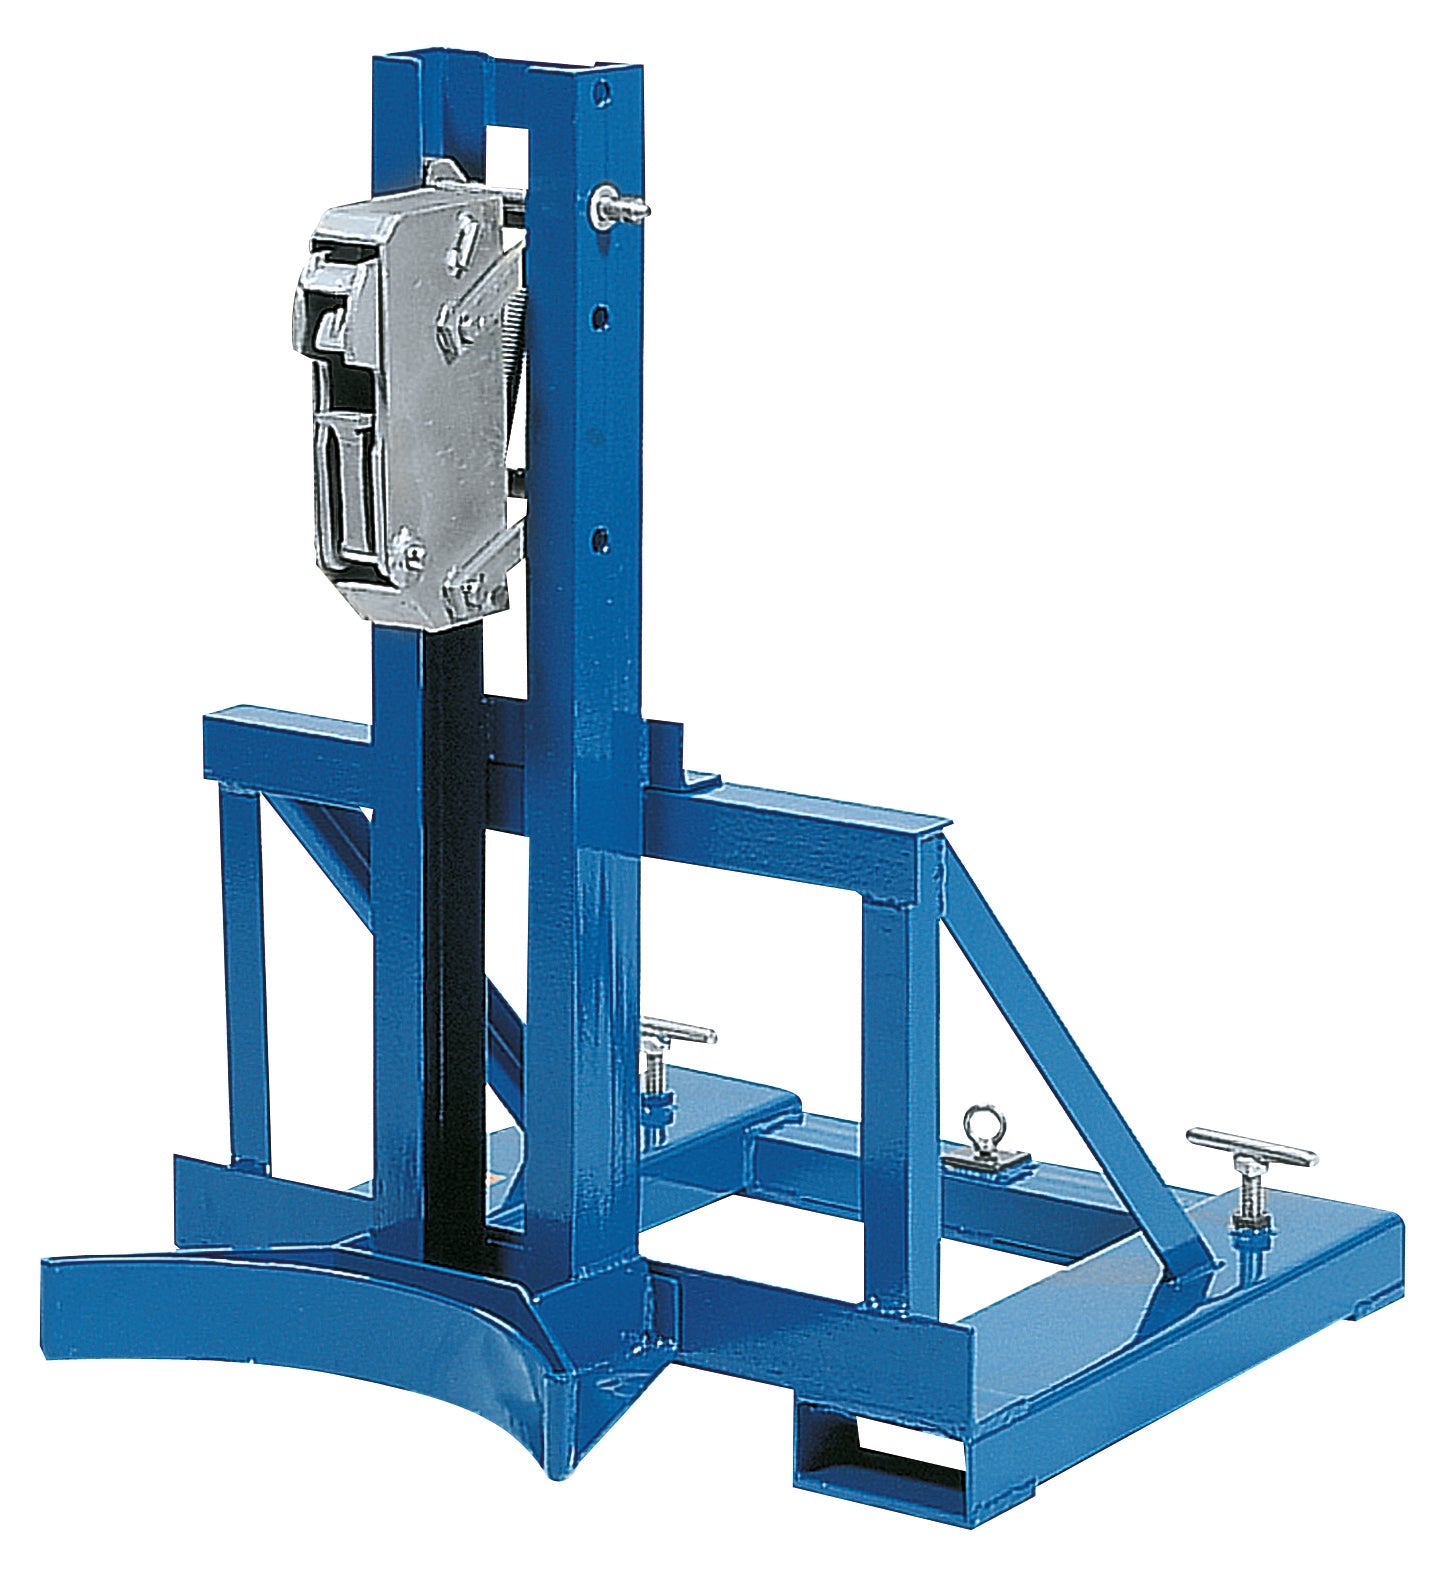 Barrel lifter for forklifts, powder-coated smooth steel